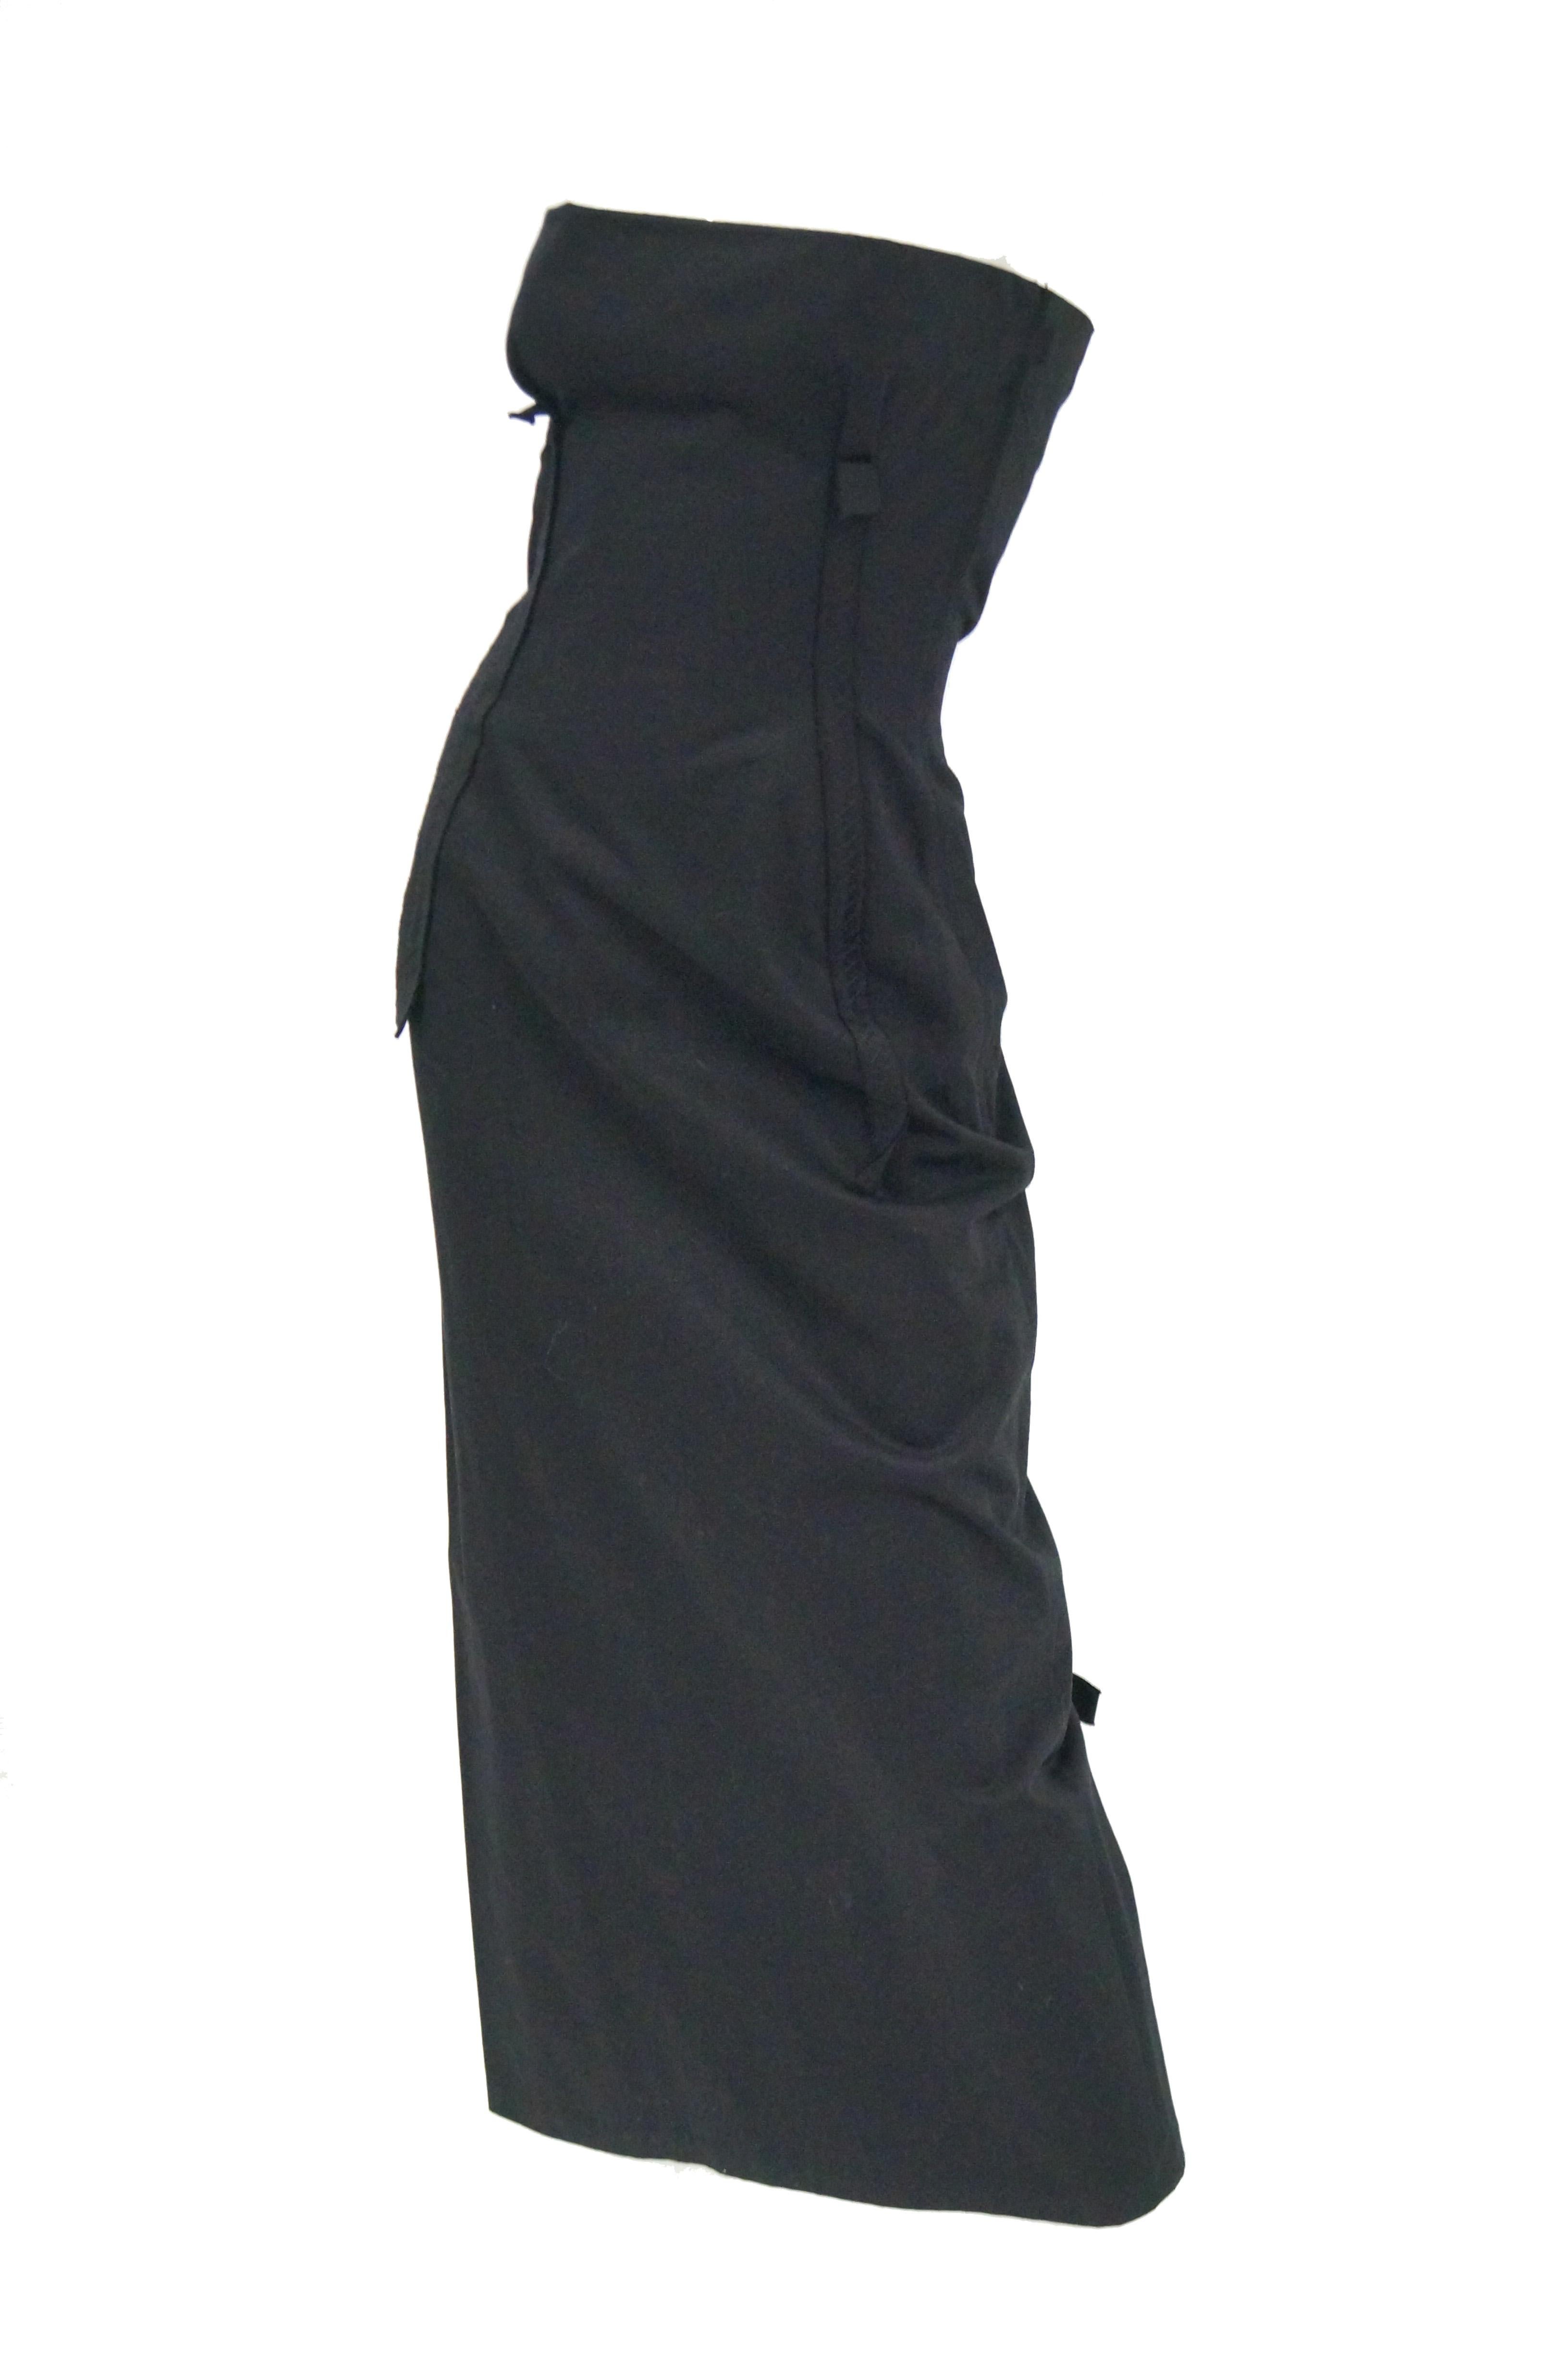  1990s Yohji Yamamoto Black Cotton Dress In Excellent Condition For Sale In Houston, TX